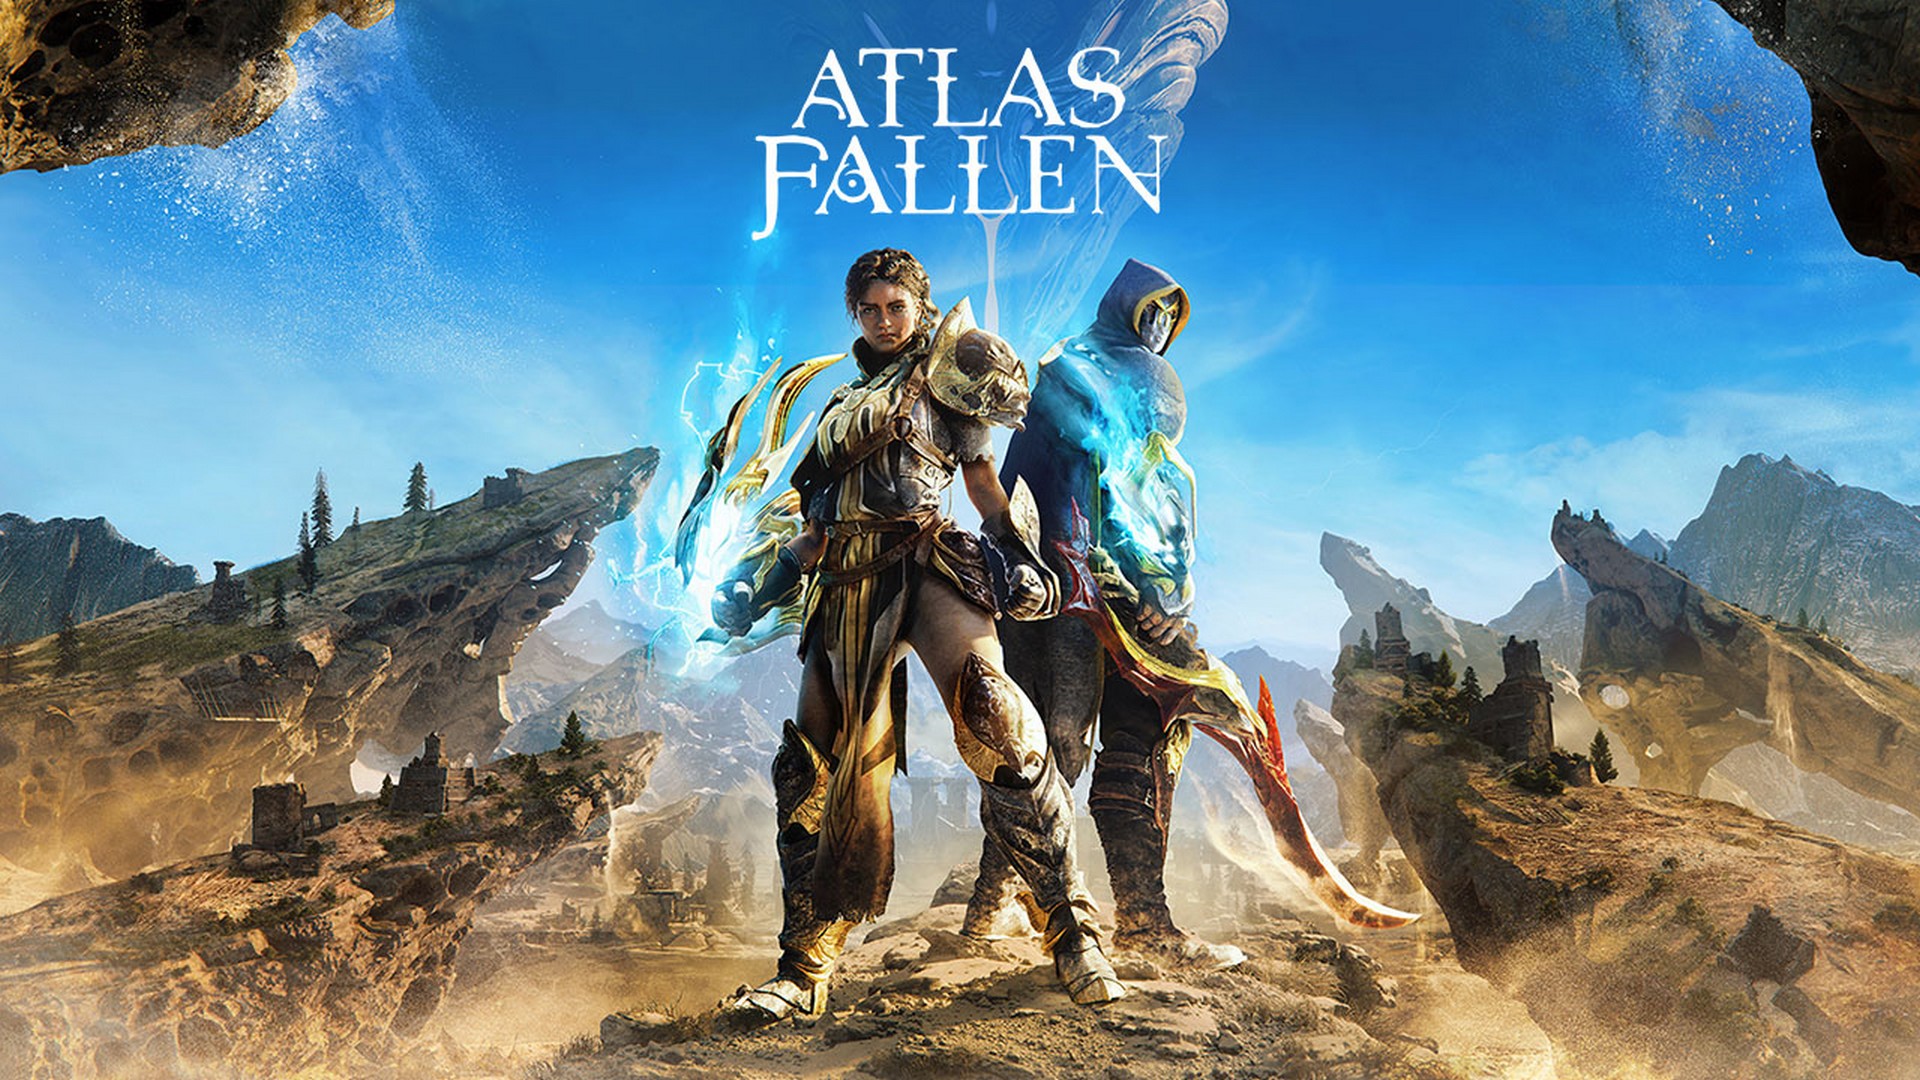 Atlas Fallen Is Now Available – Watch The Launch Trailer Before Gliding The Sands Of Atlas